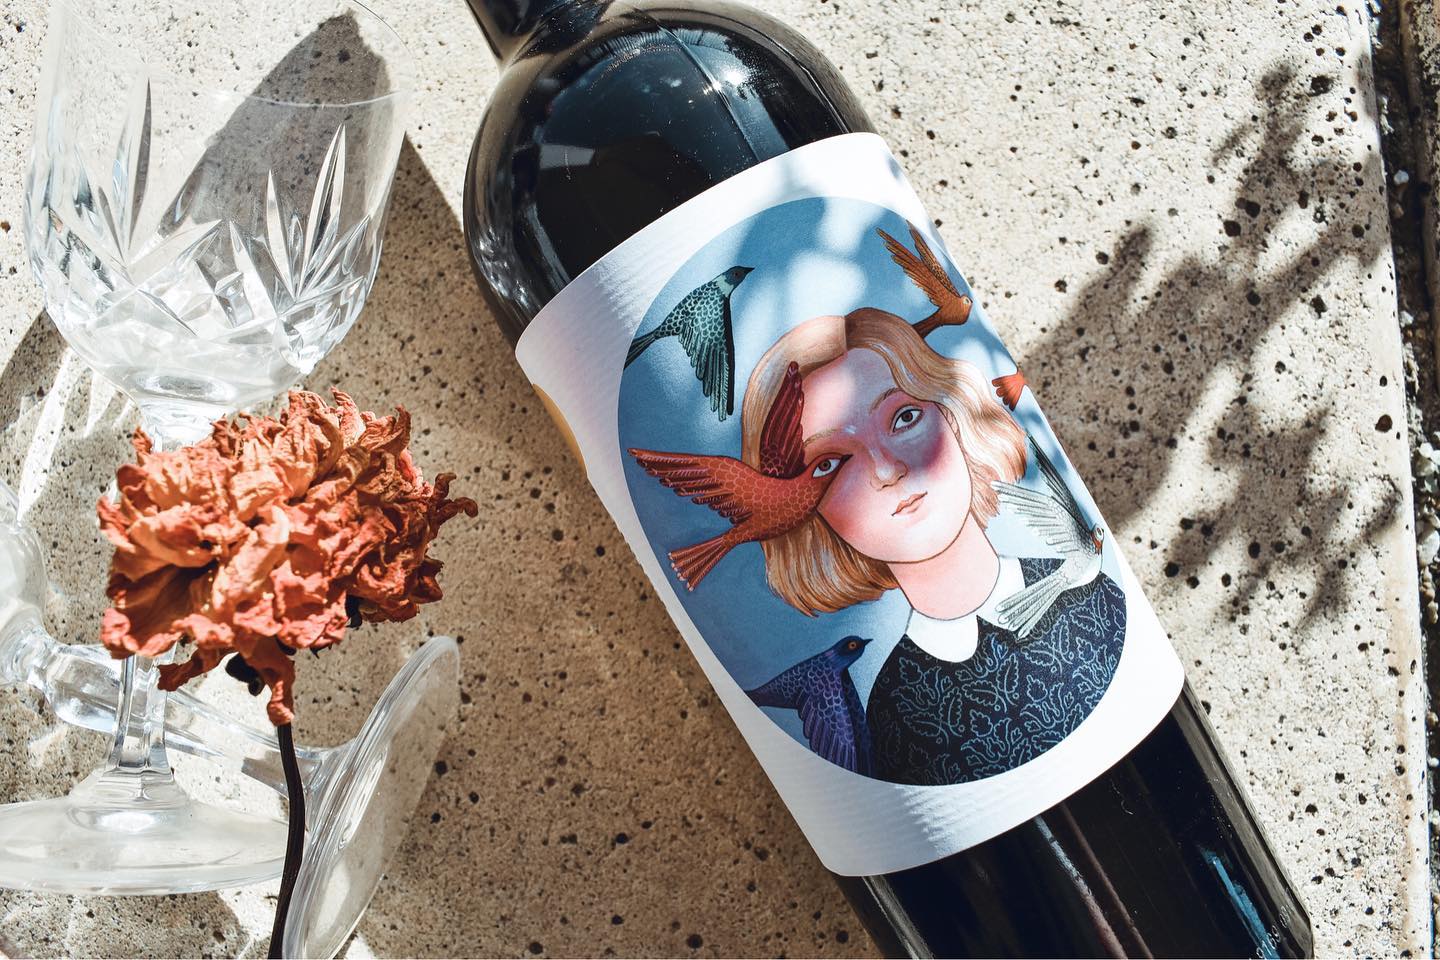 Discover your new favourite women-made wines!